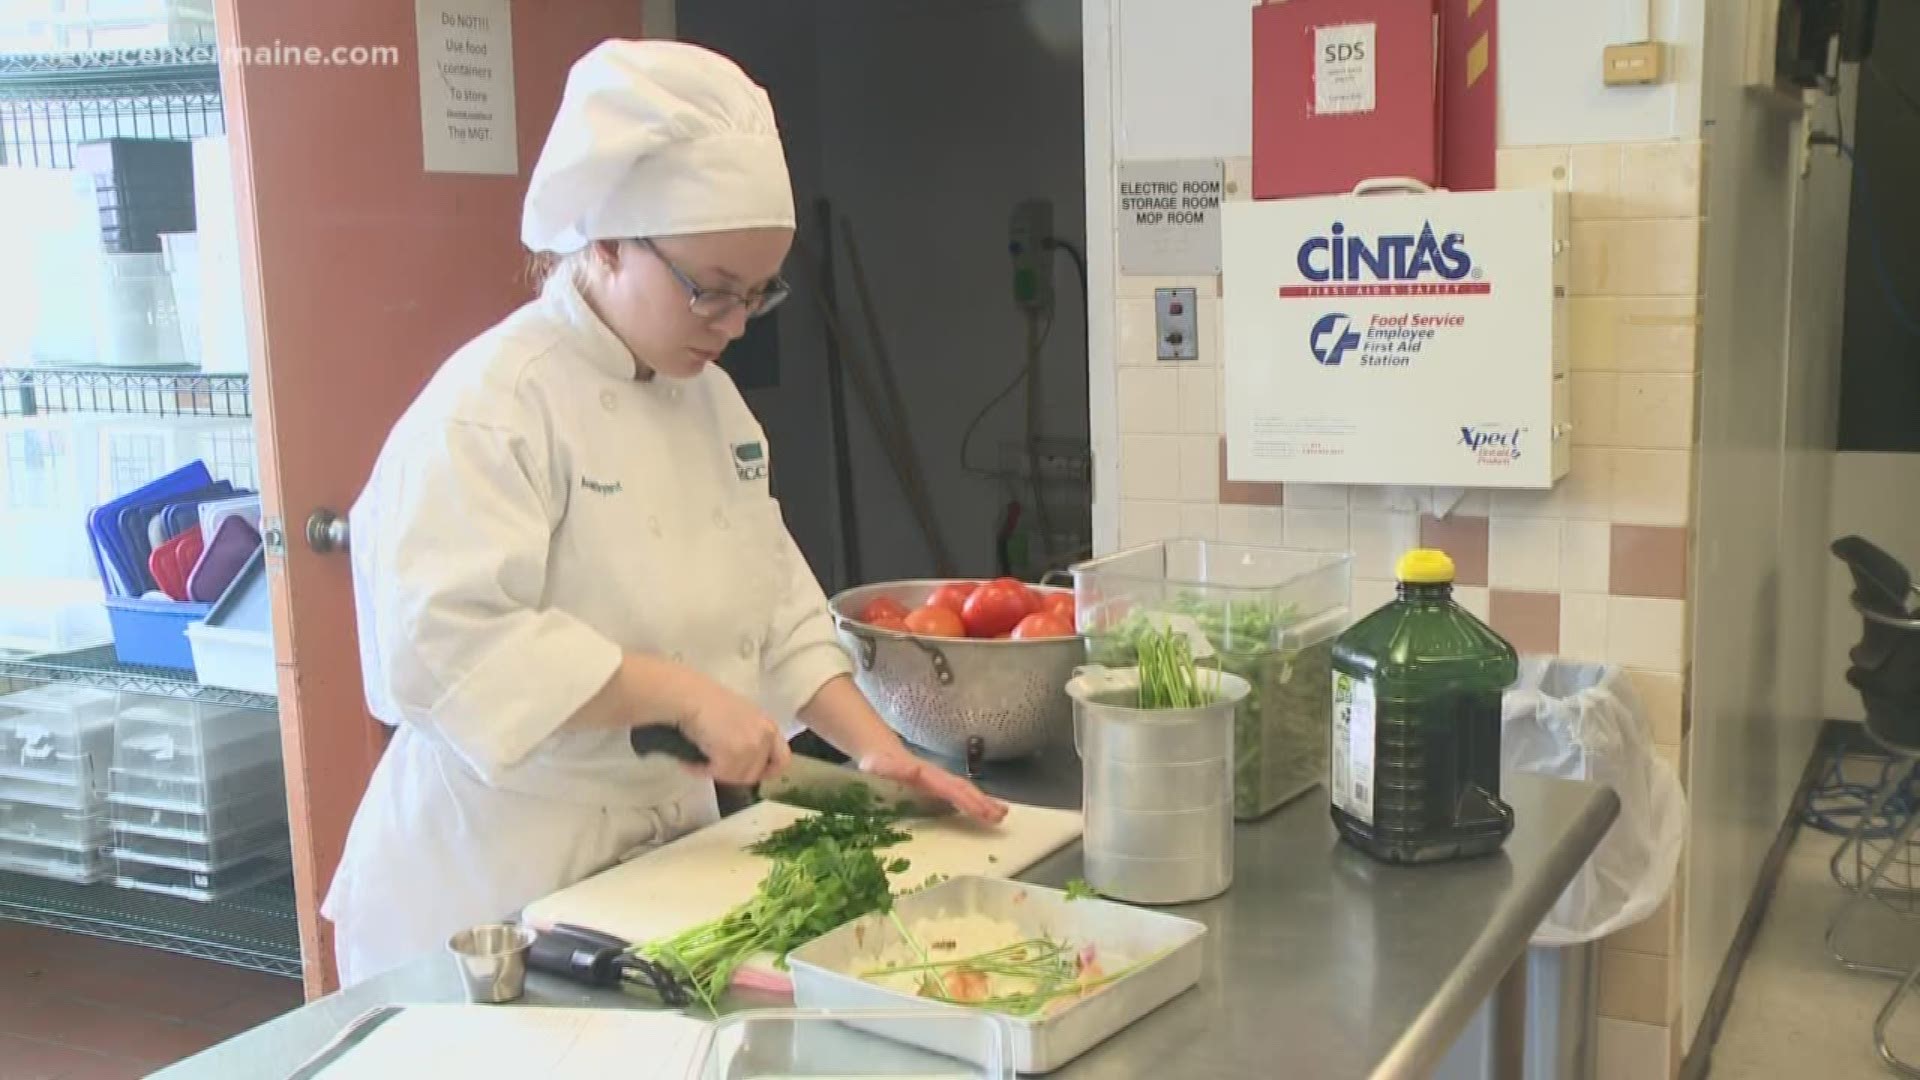 SMCC culinary program delivers high caliber chef's the restaurants across the bay. It is a hands-on learning experience, from chopping broccoli to serving to the public.